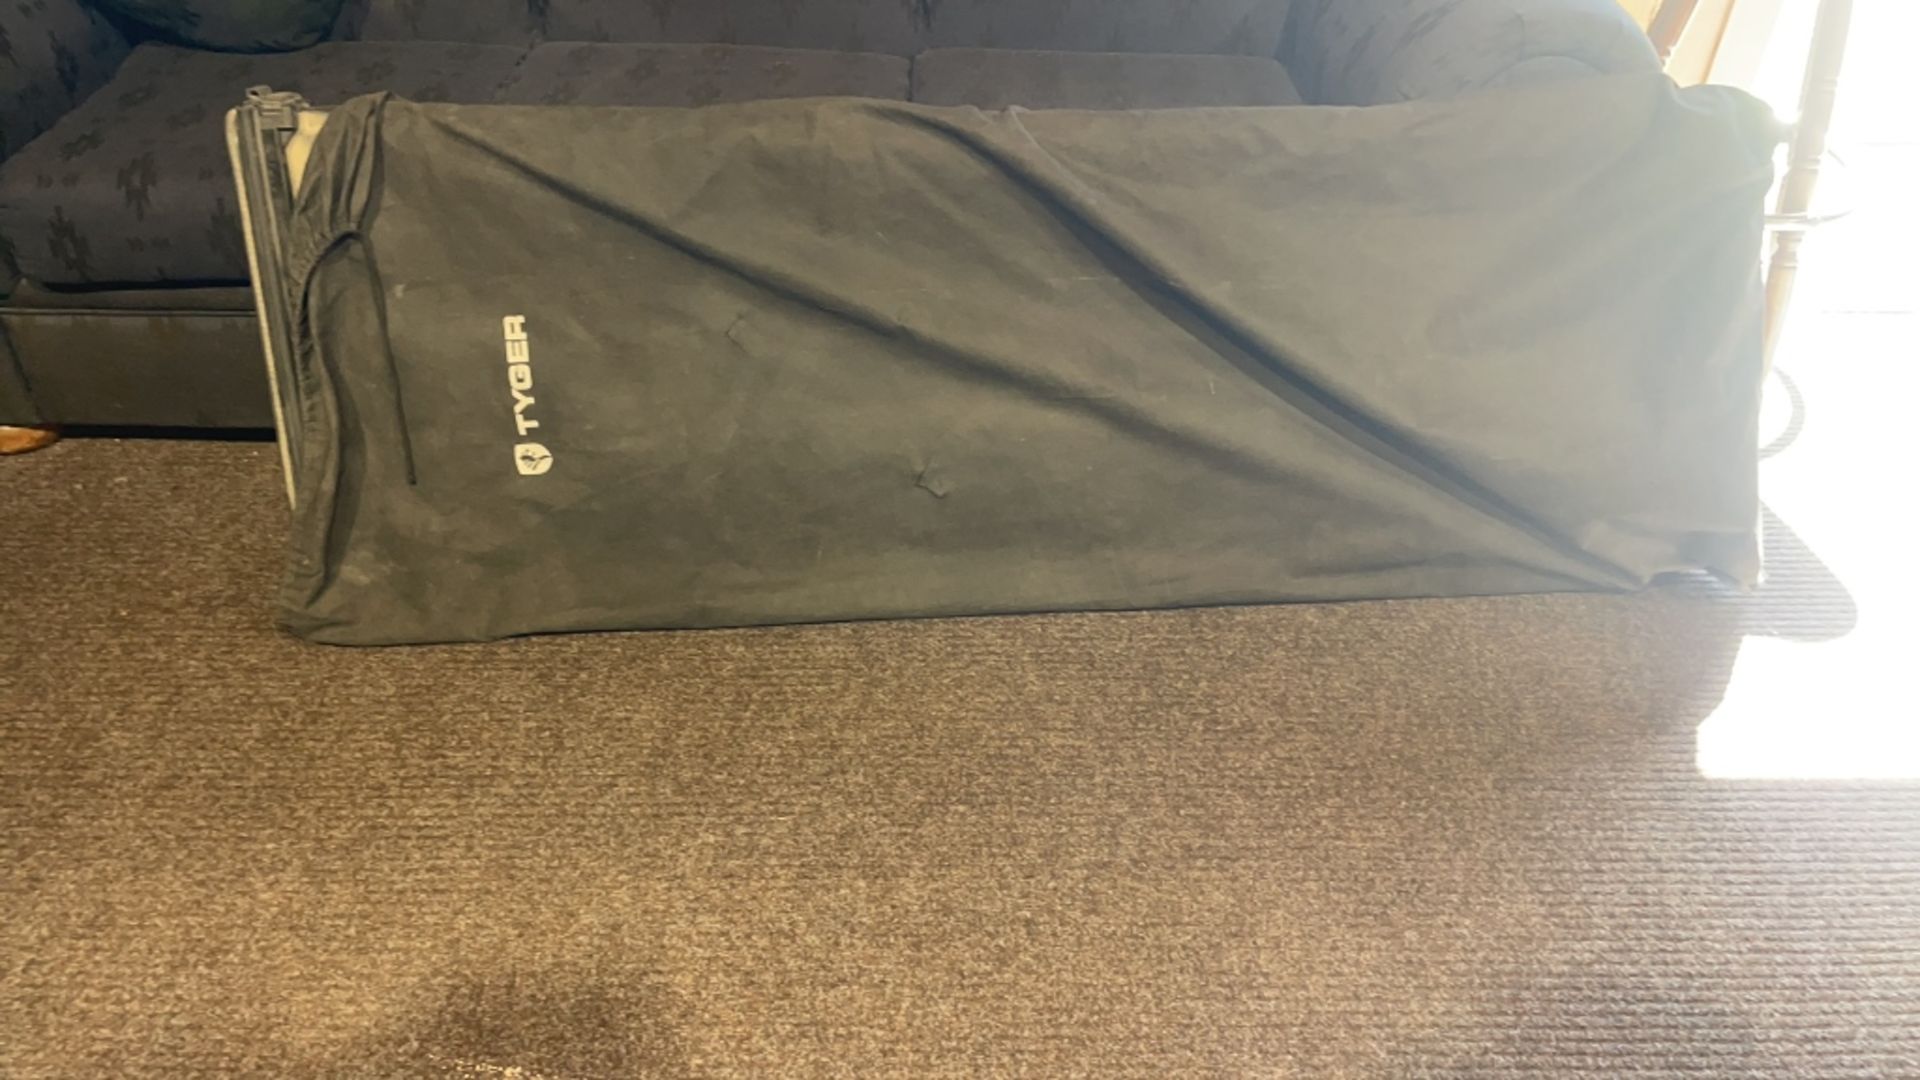 Folding Bed Cover - Image 11 of 12